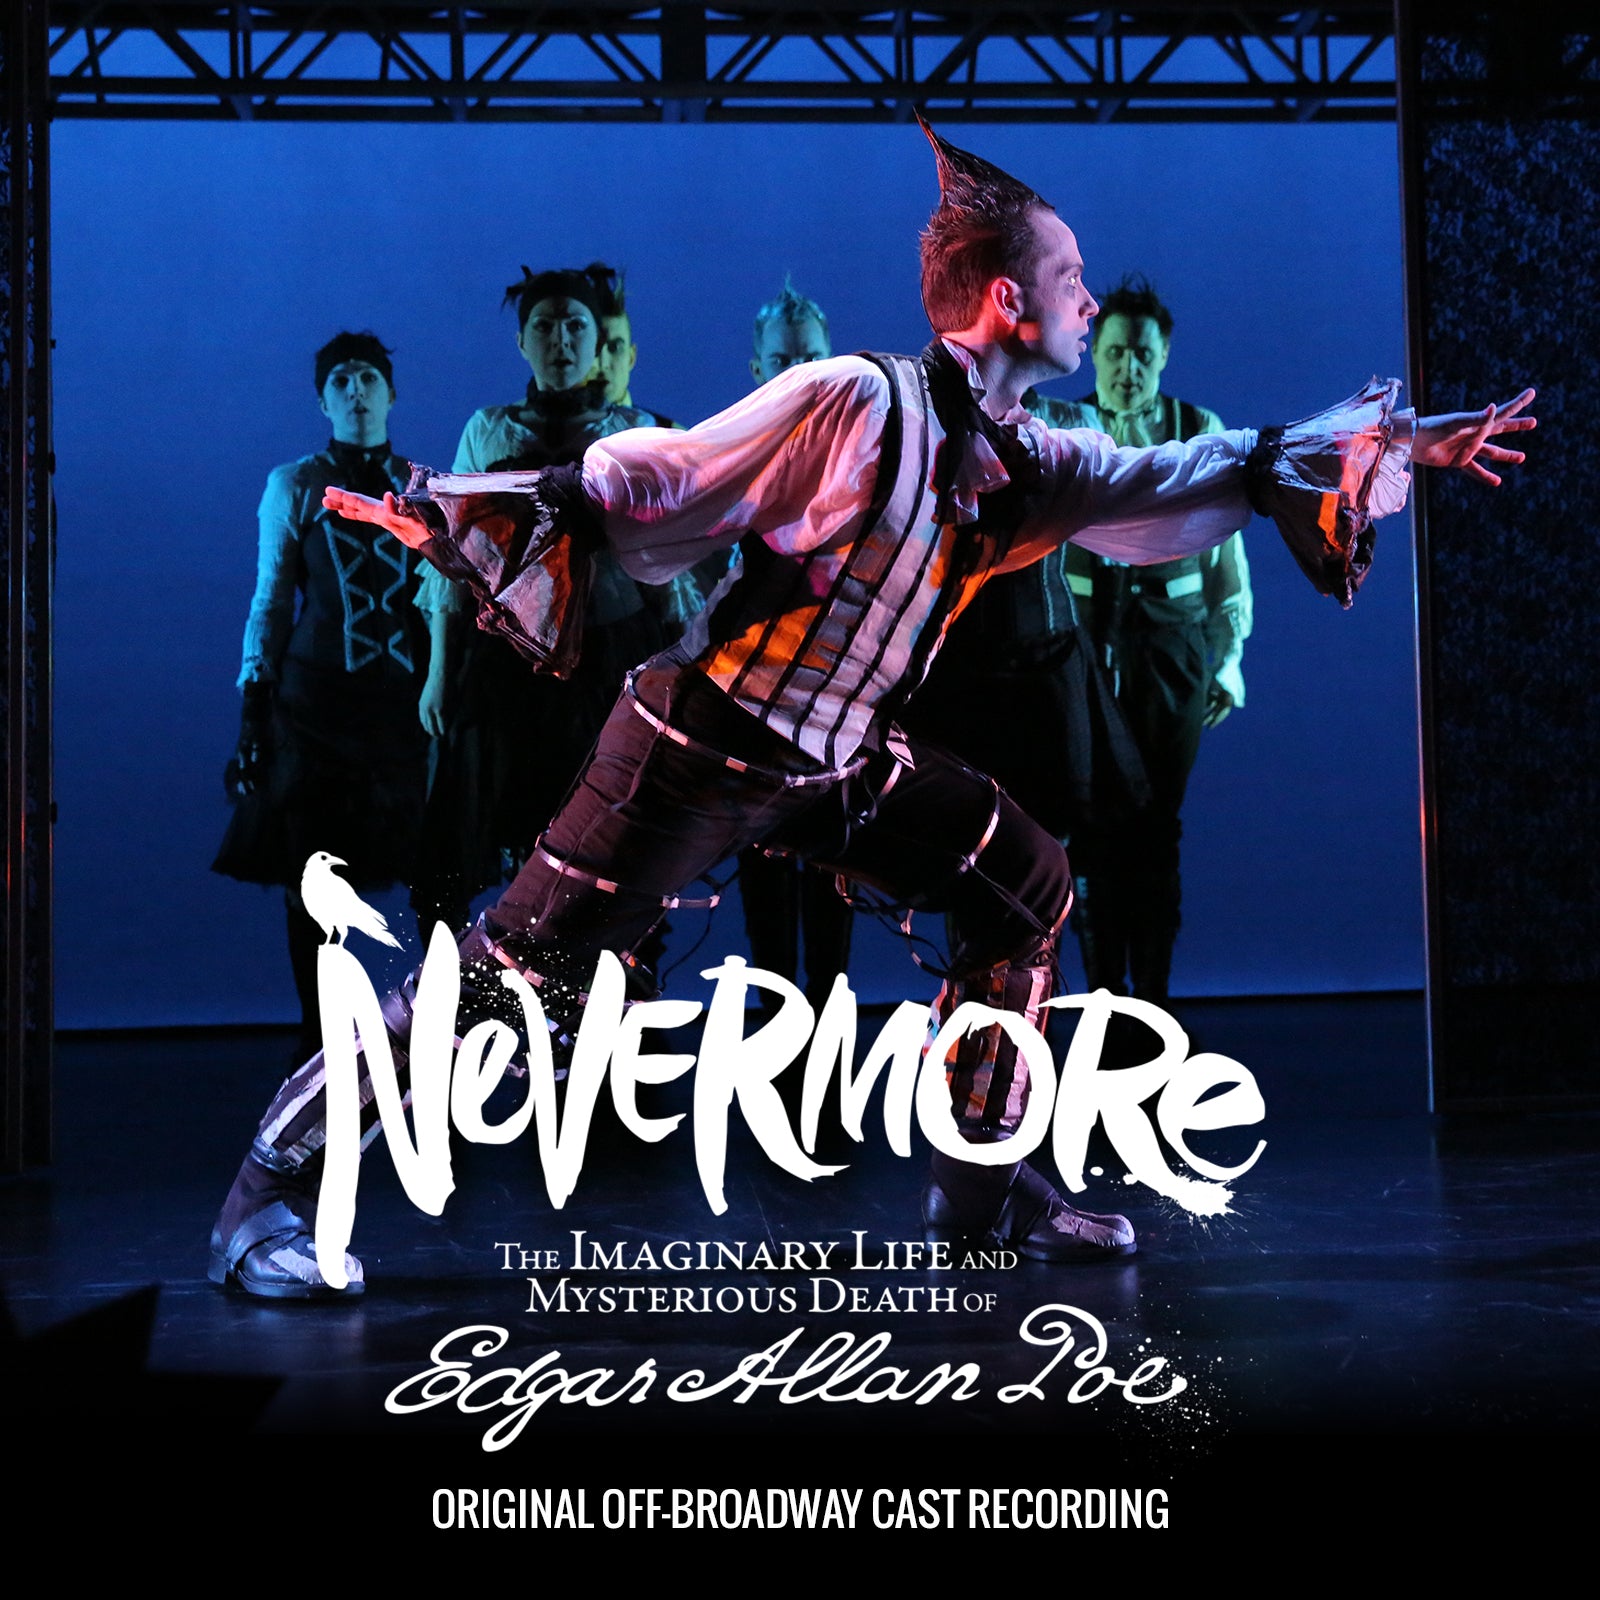 Nevermore - The Imaginary Life and Mysterious Death of Edgar Allan Poe (Original Off-Broadway Cast Recording) [2 CD set]